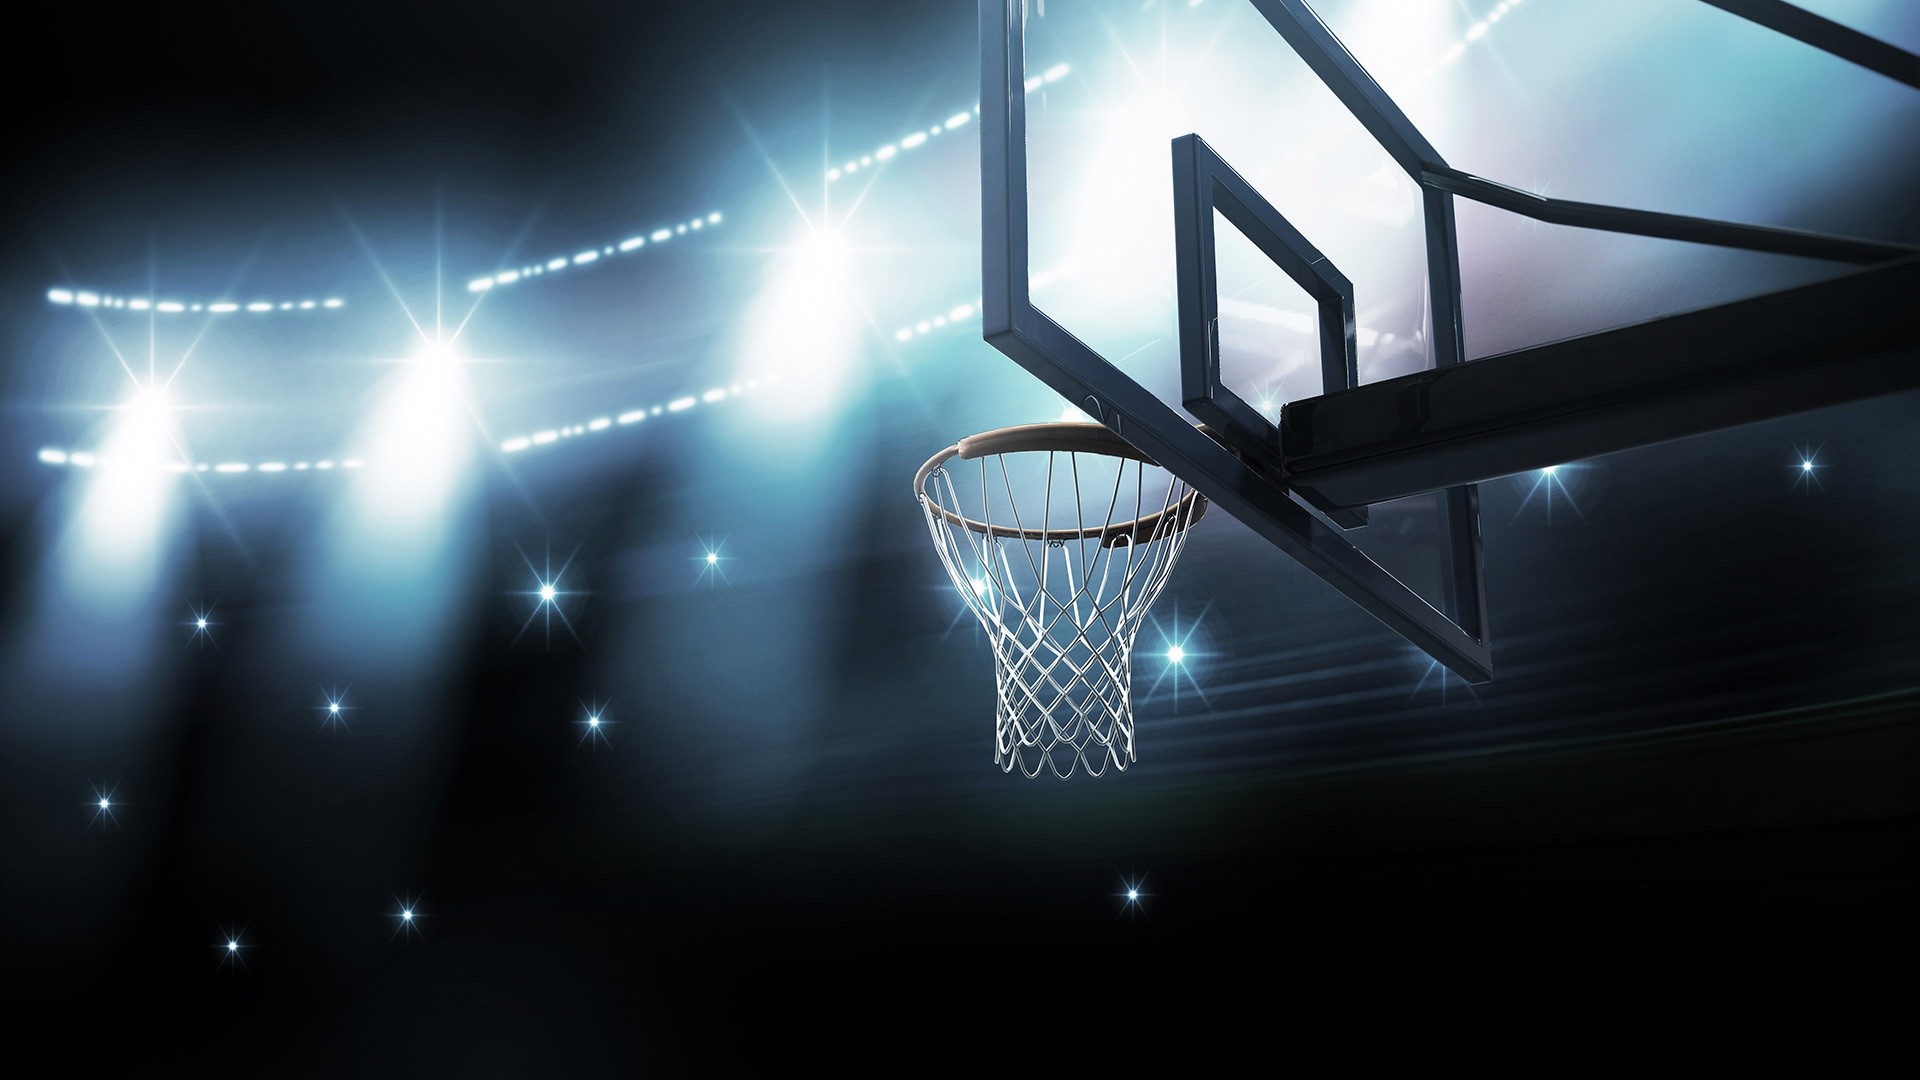 25 Basketball Wallpapers, Backgrounds, Images,pictures - Basketball Court Flashing Lights - HD Wallpaper 